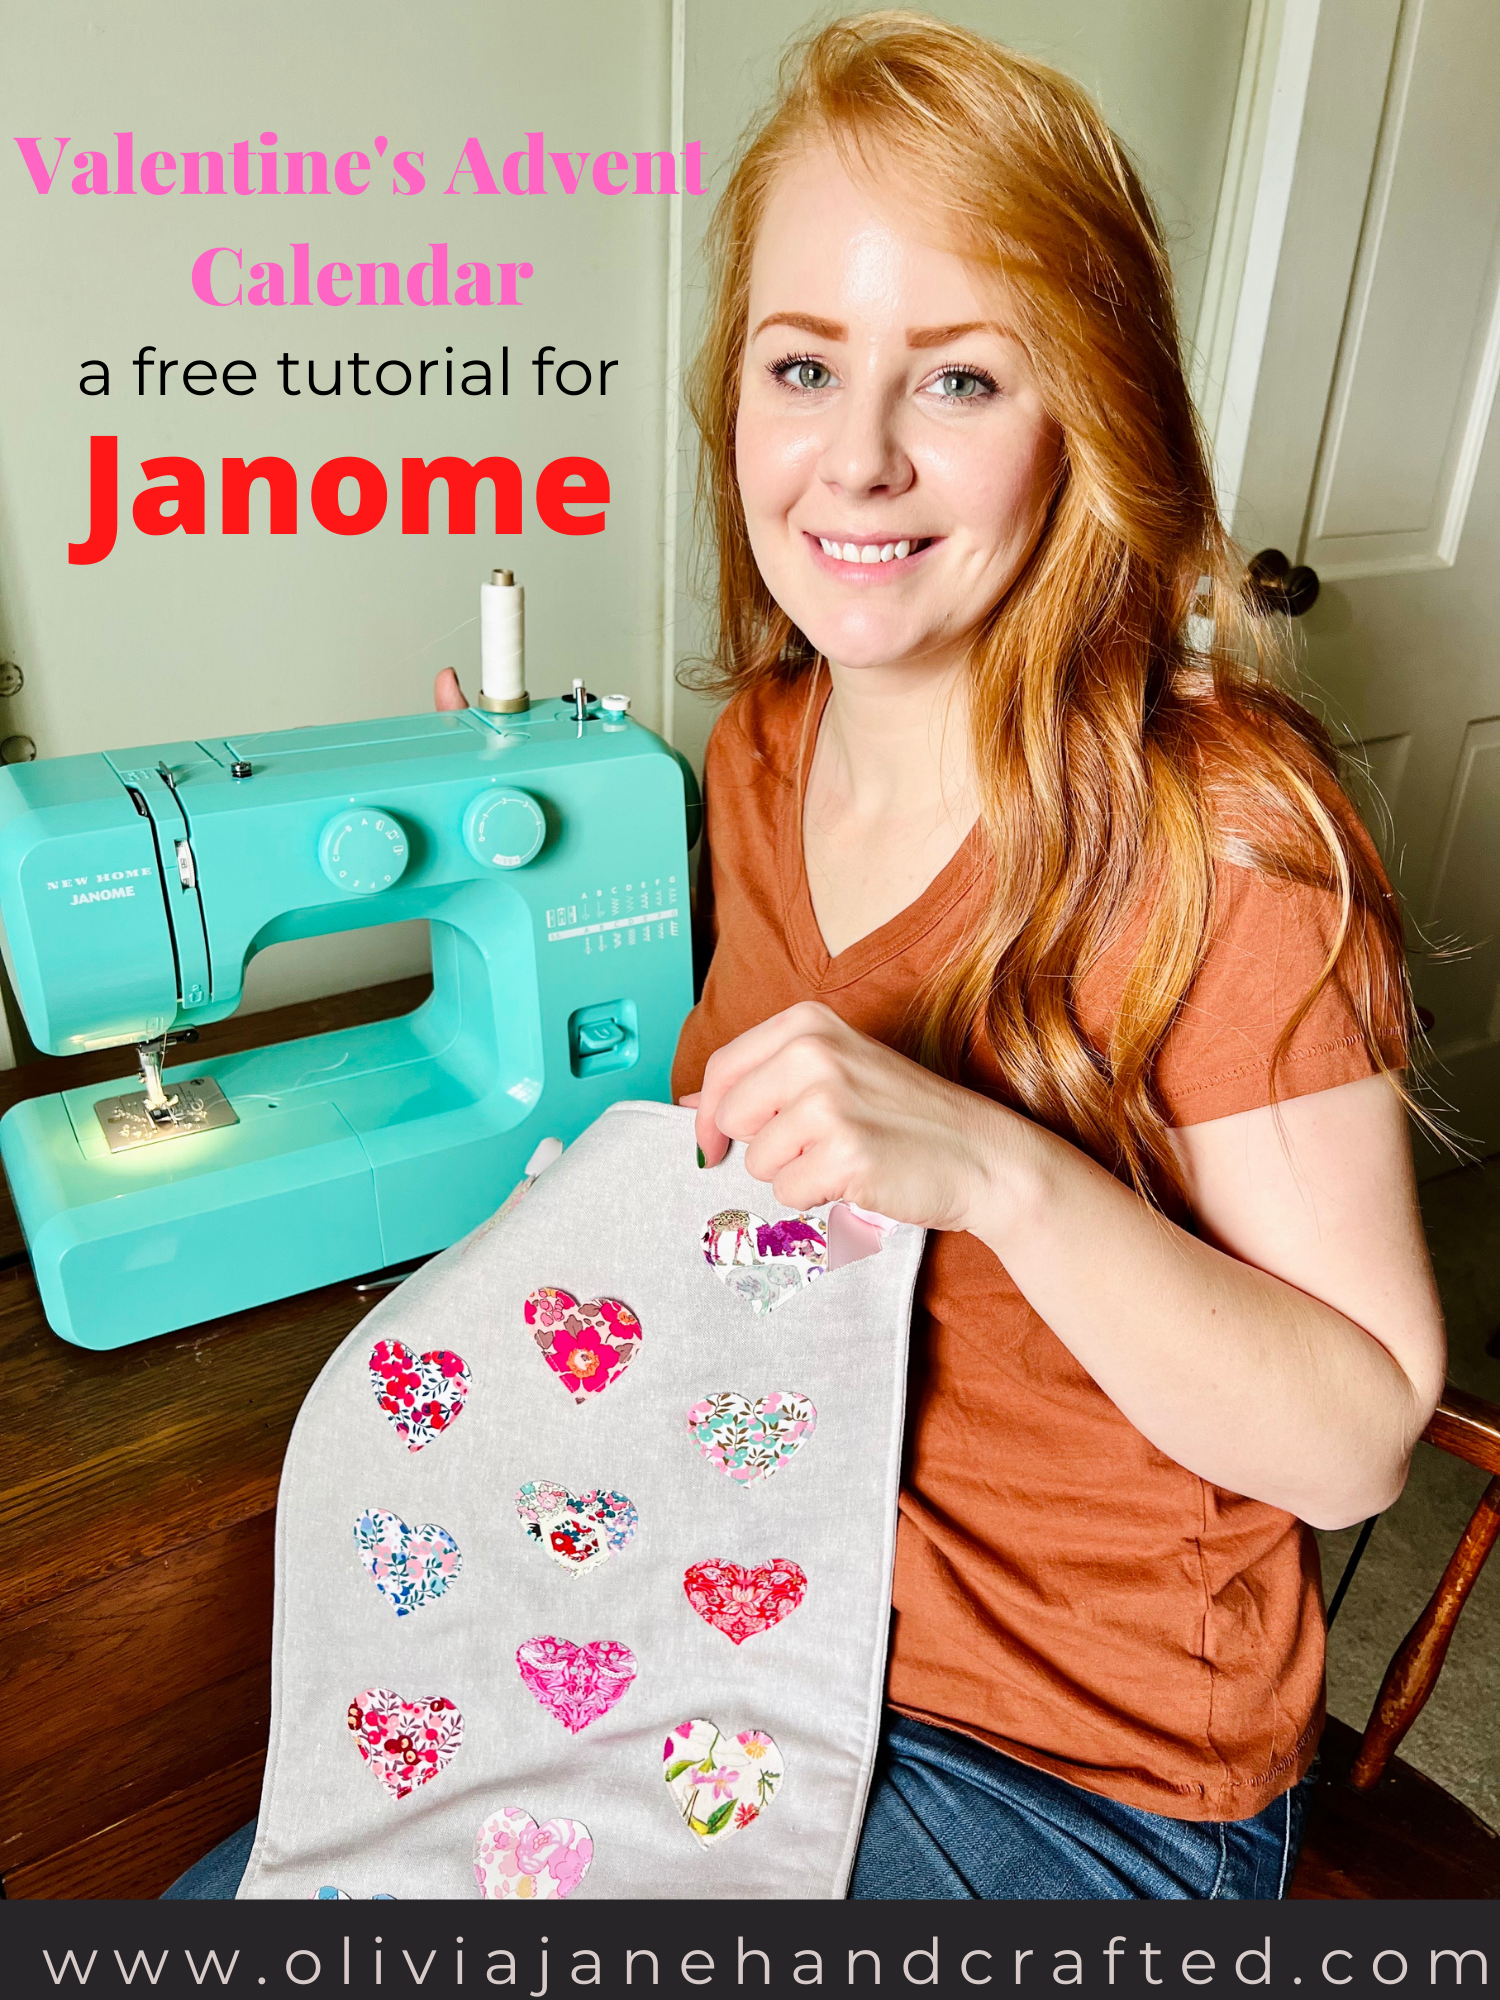 Kids Sleeping Bag : a Janome project : Olivia Jane Handcrafted - Blog %